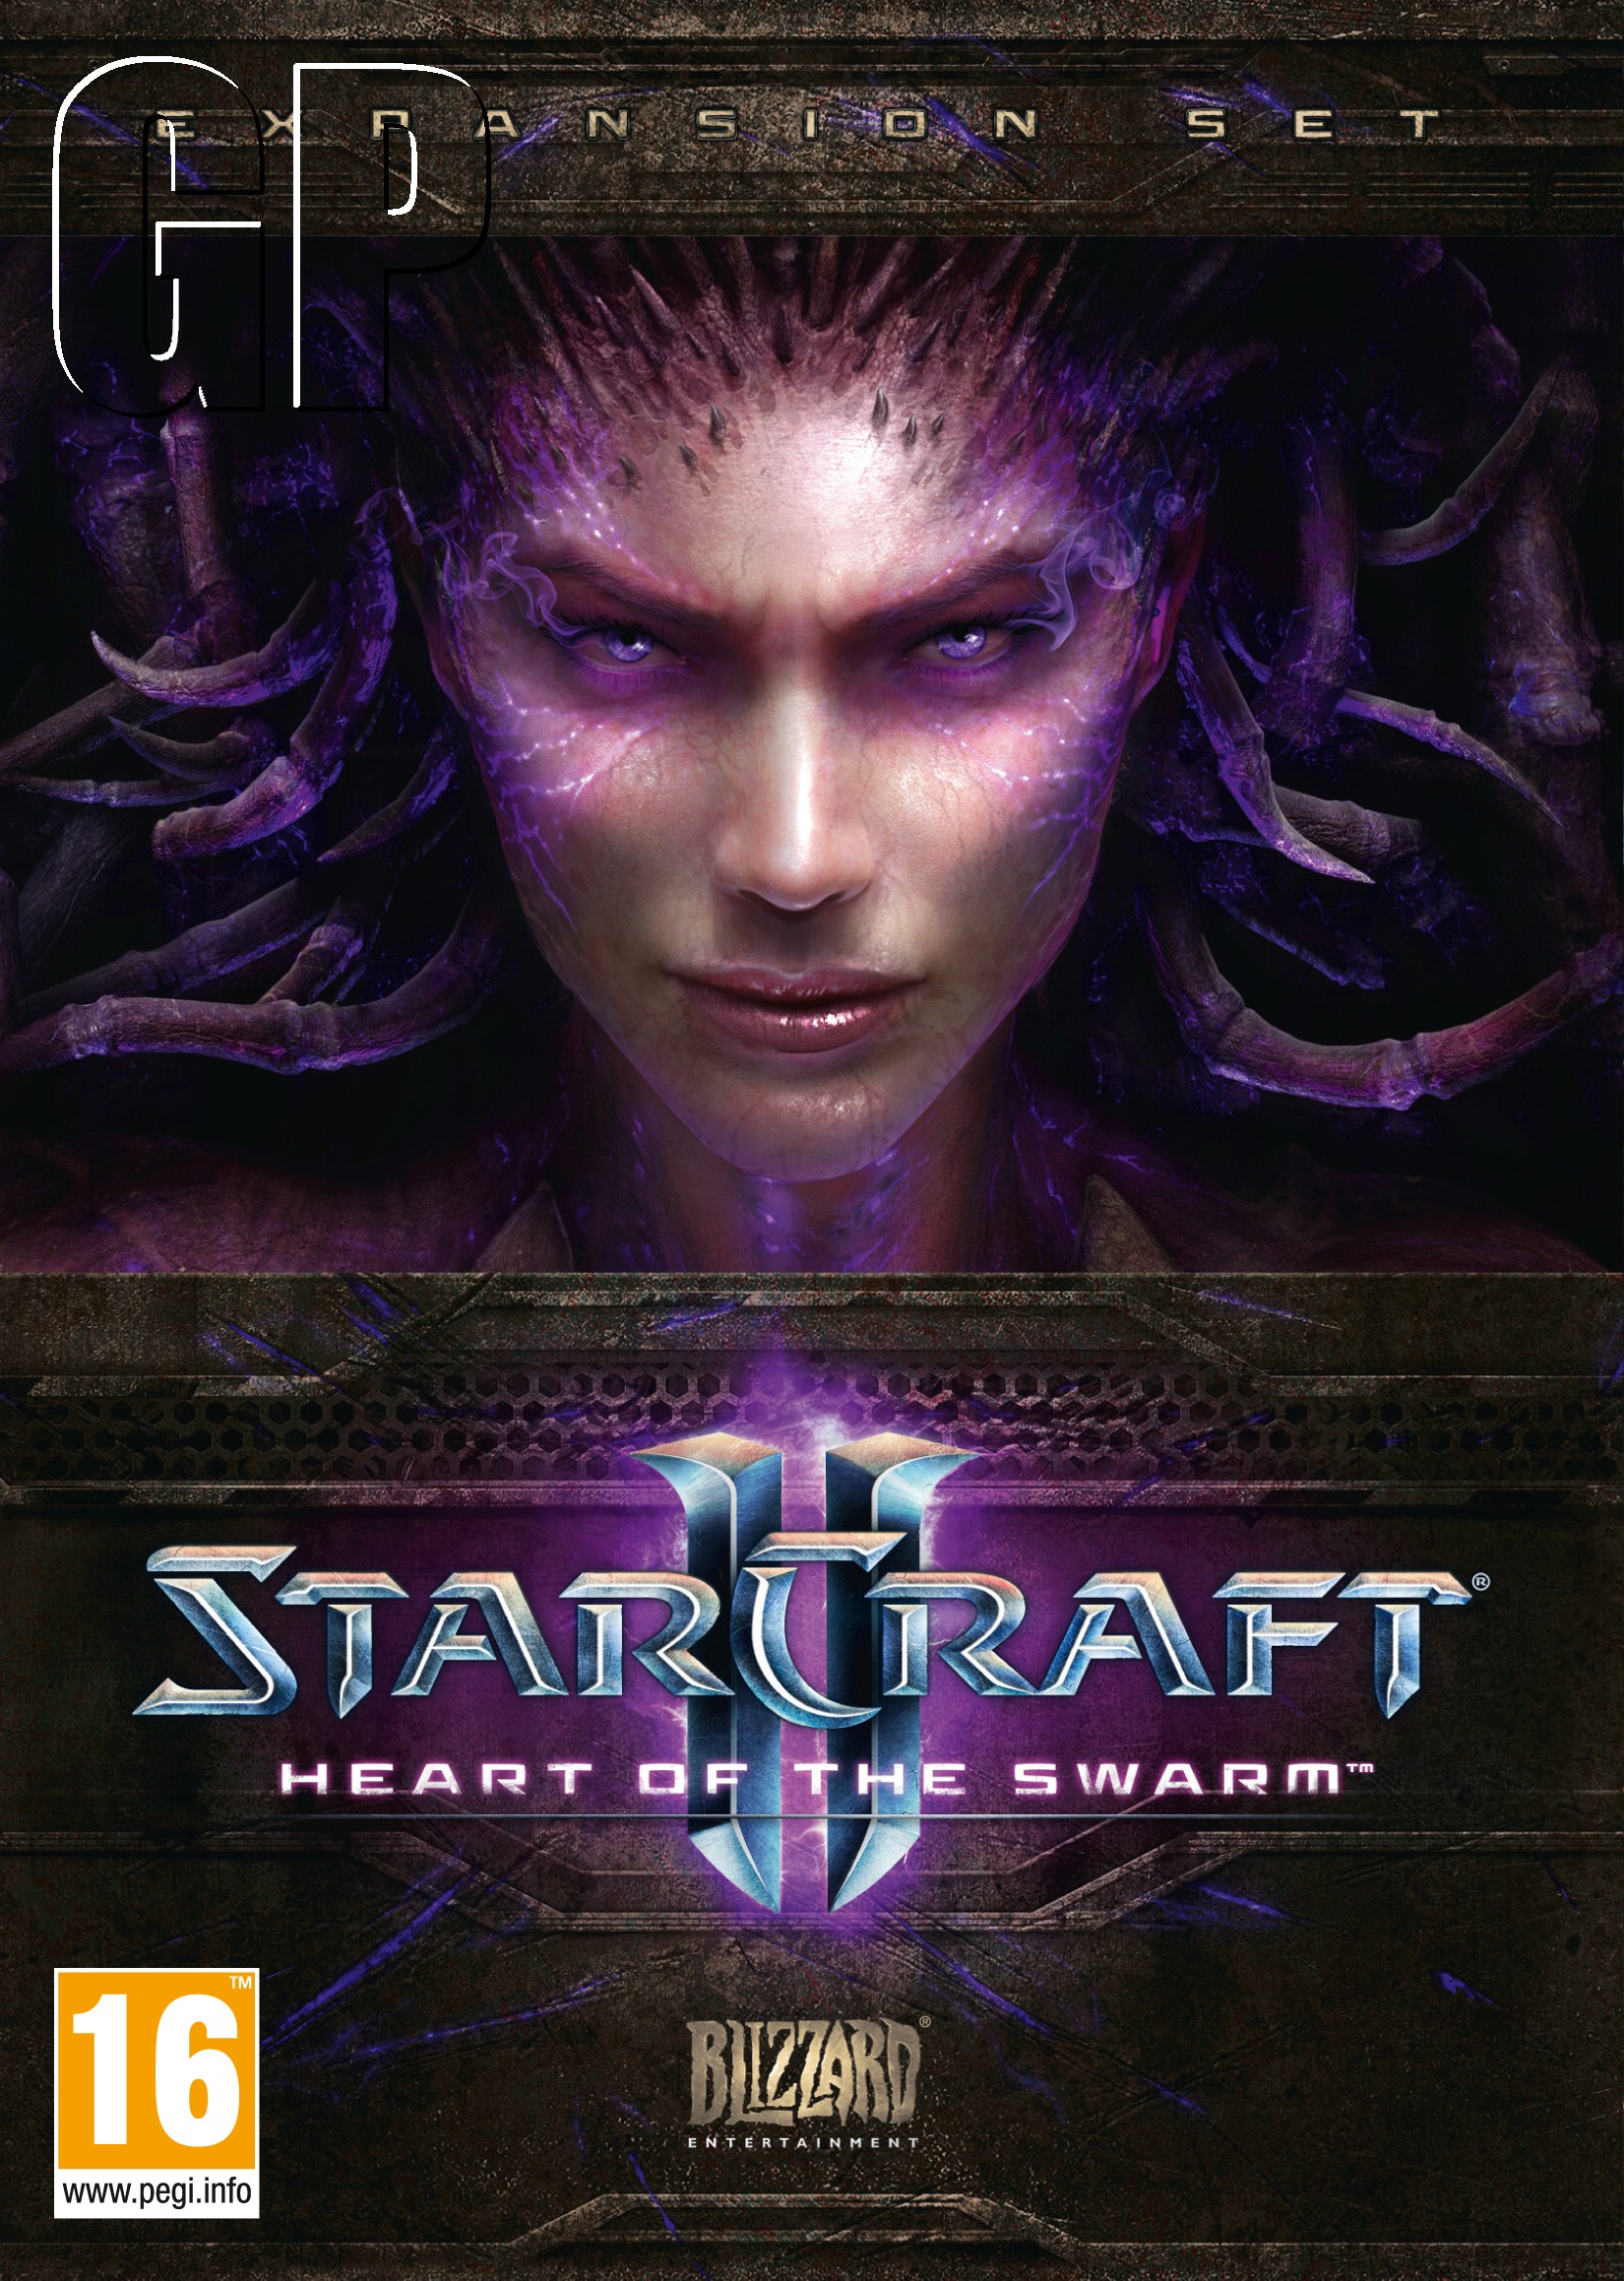 starcraft-ii-heart-of-the-swarm-dlc-announced-gameconnect